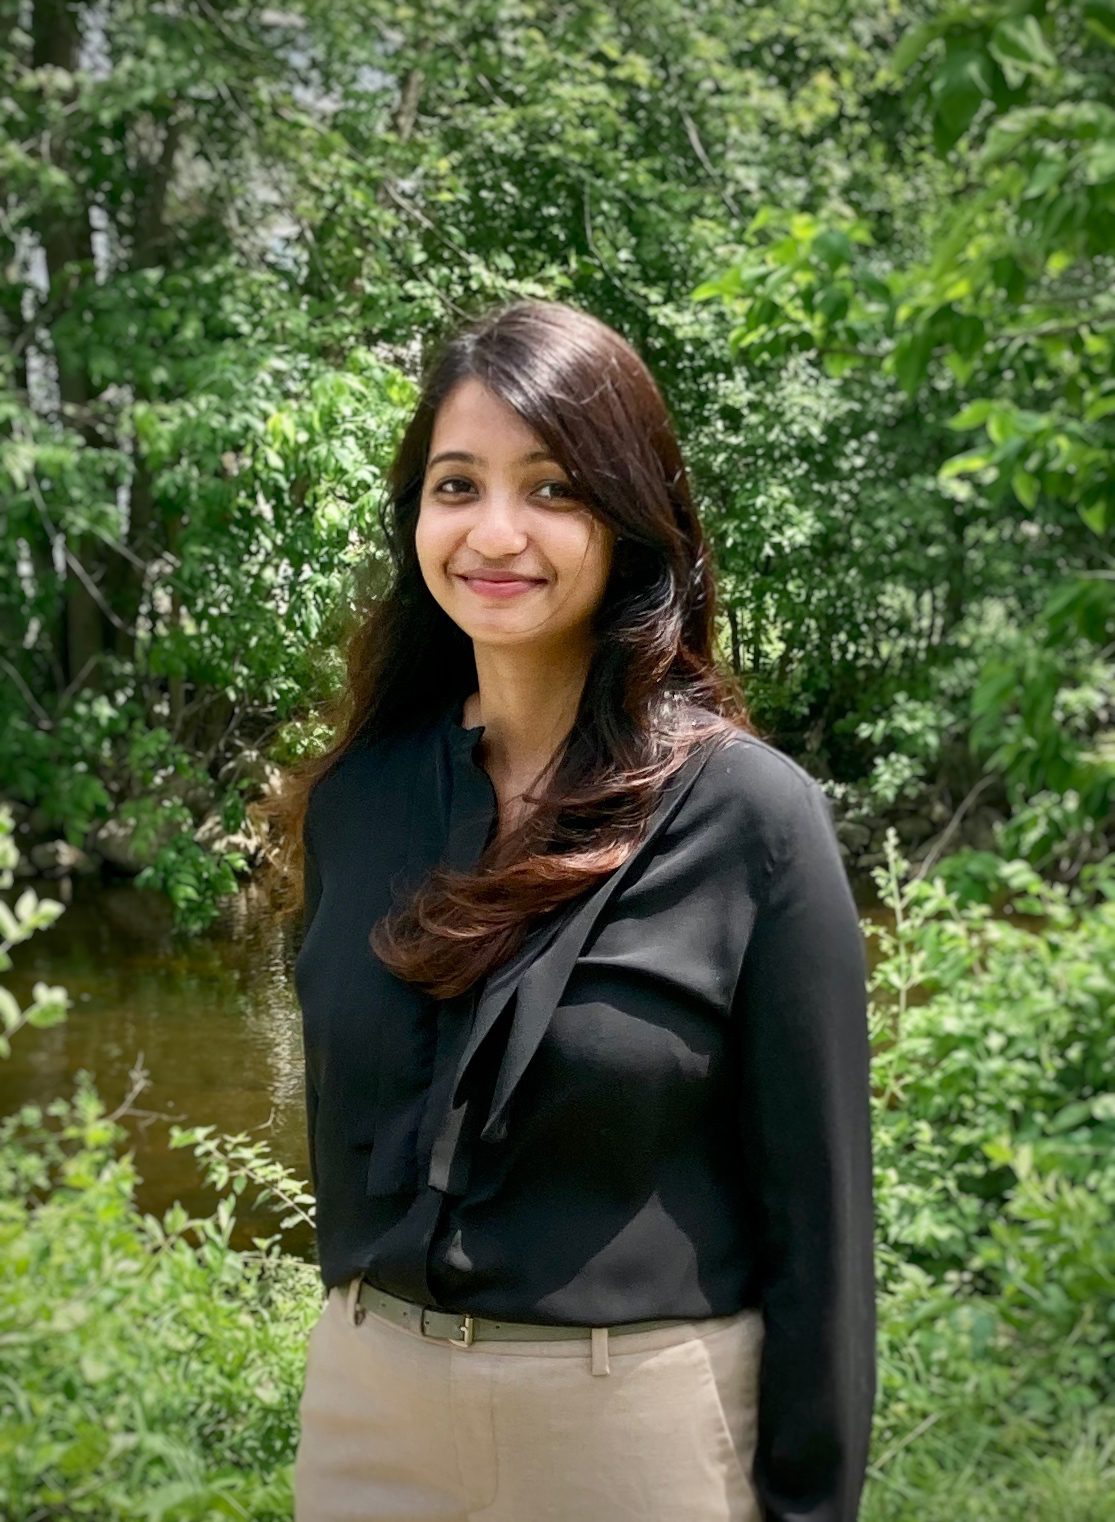 a photo of Deepthi Bathala standing in front of green foliage